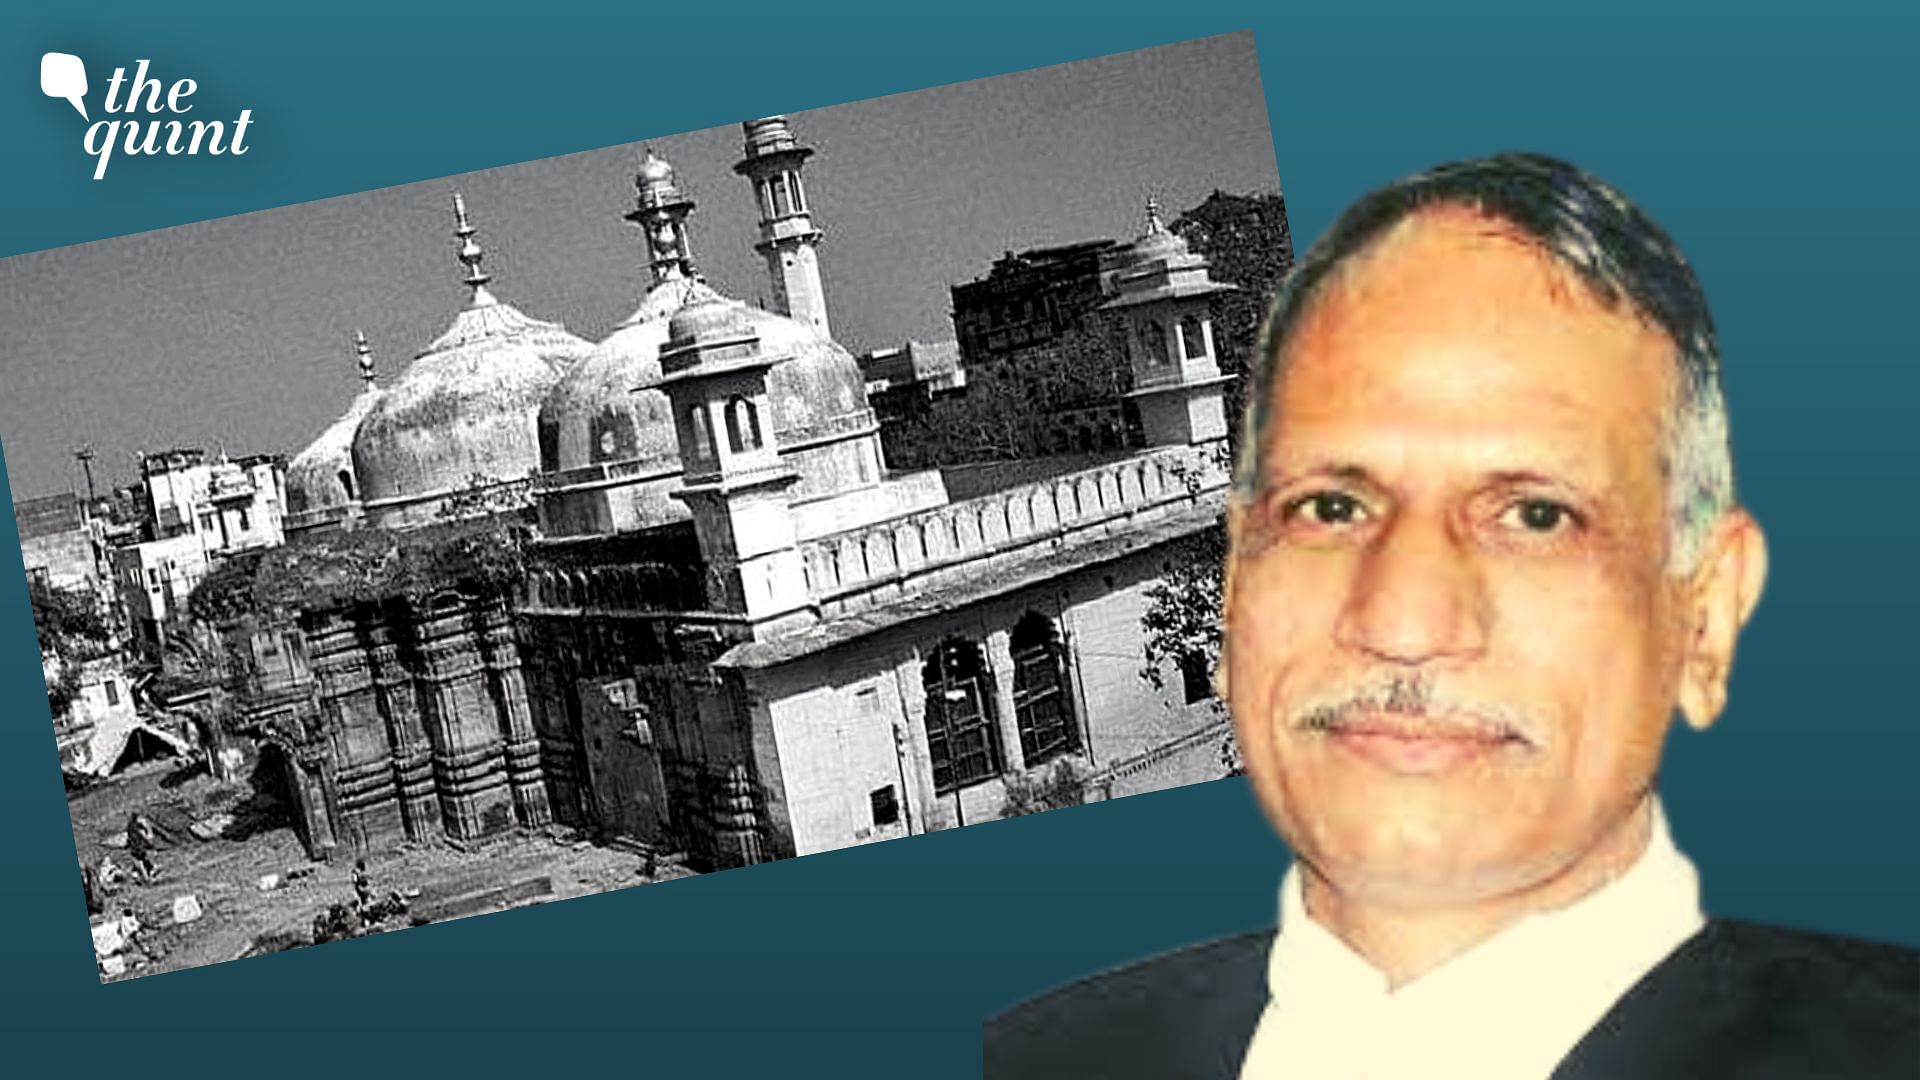 <div class="paragraphs"><p>Justice Govind Mathur's&nbsp;remarks came with regard to the barrage of temples and mosques related legal disputes, ranging from <a href="https://www.thequint.com/news/law/gyanvapi-mosque-supreme-court-transfers-case-to-district-judge-maintainability-to-be-decided-on-priority">Gyanvapi mosque dispute</a> in Varanasi to the dispute over <a href="https://www.thequint.com/news/law/gyanvapi-mosque-shahi-idgah-varanasi-mathura-qutub-minar-reopening-history-the-ayodhya-judgment-vs-what-followed#read-more">Qutub Minar</a> in Delhi, which appear to have taken over the courts of the country.</p></div>